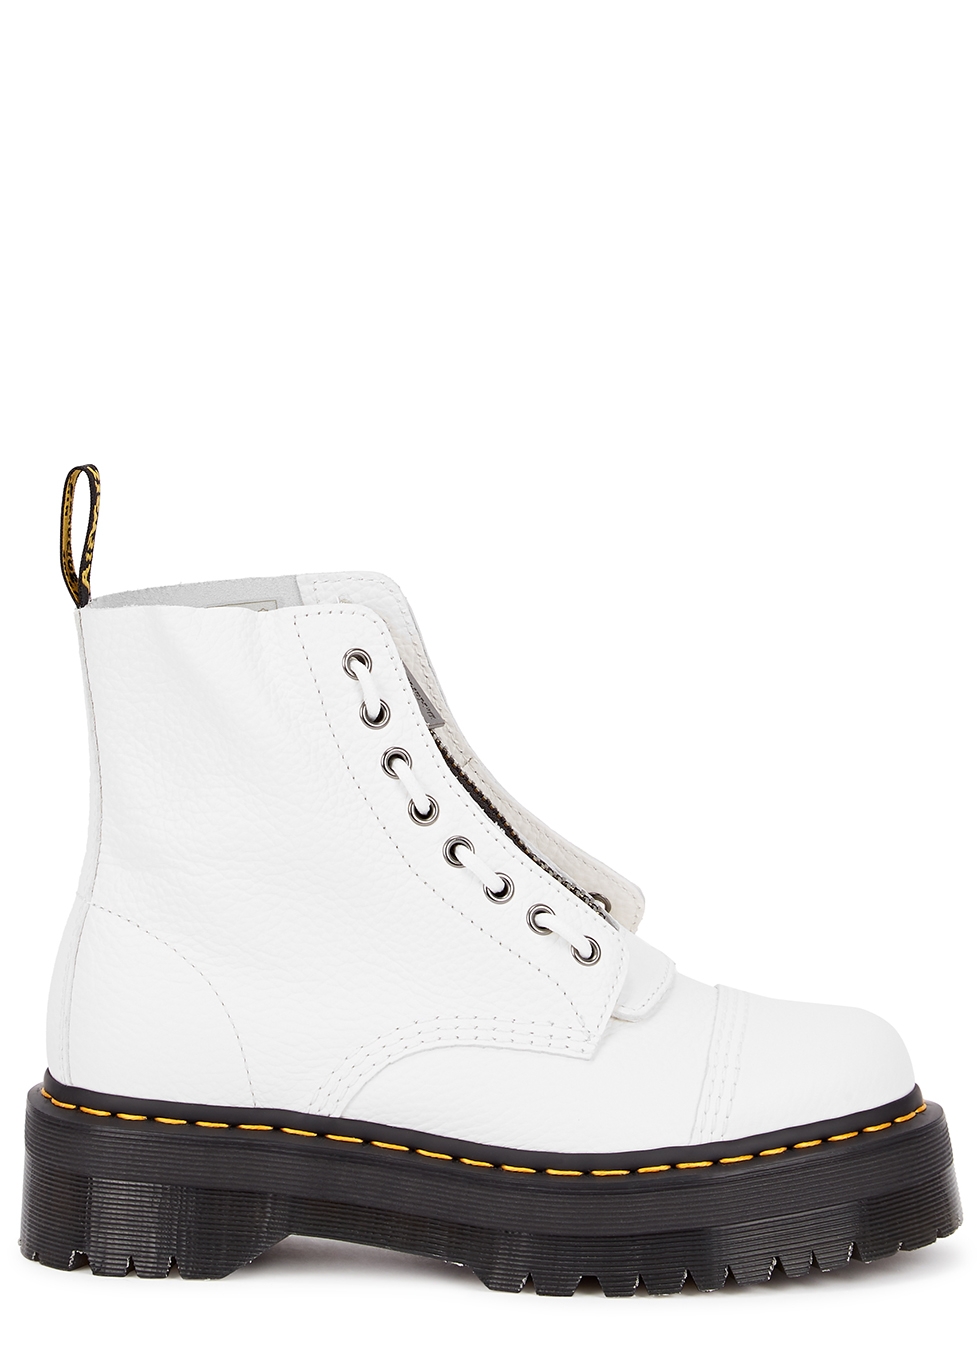 Dr Martens Sinclair white leather flatform ankle boots